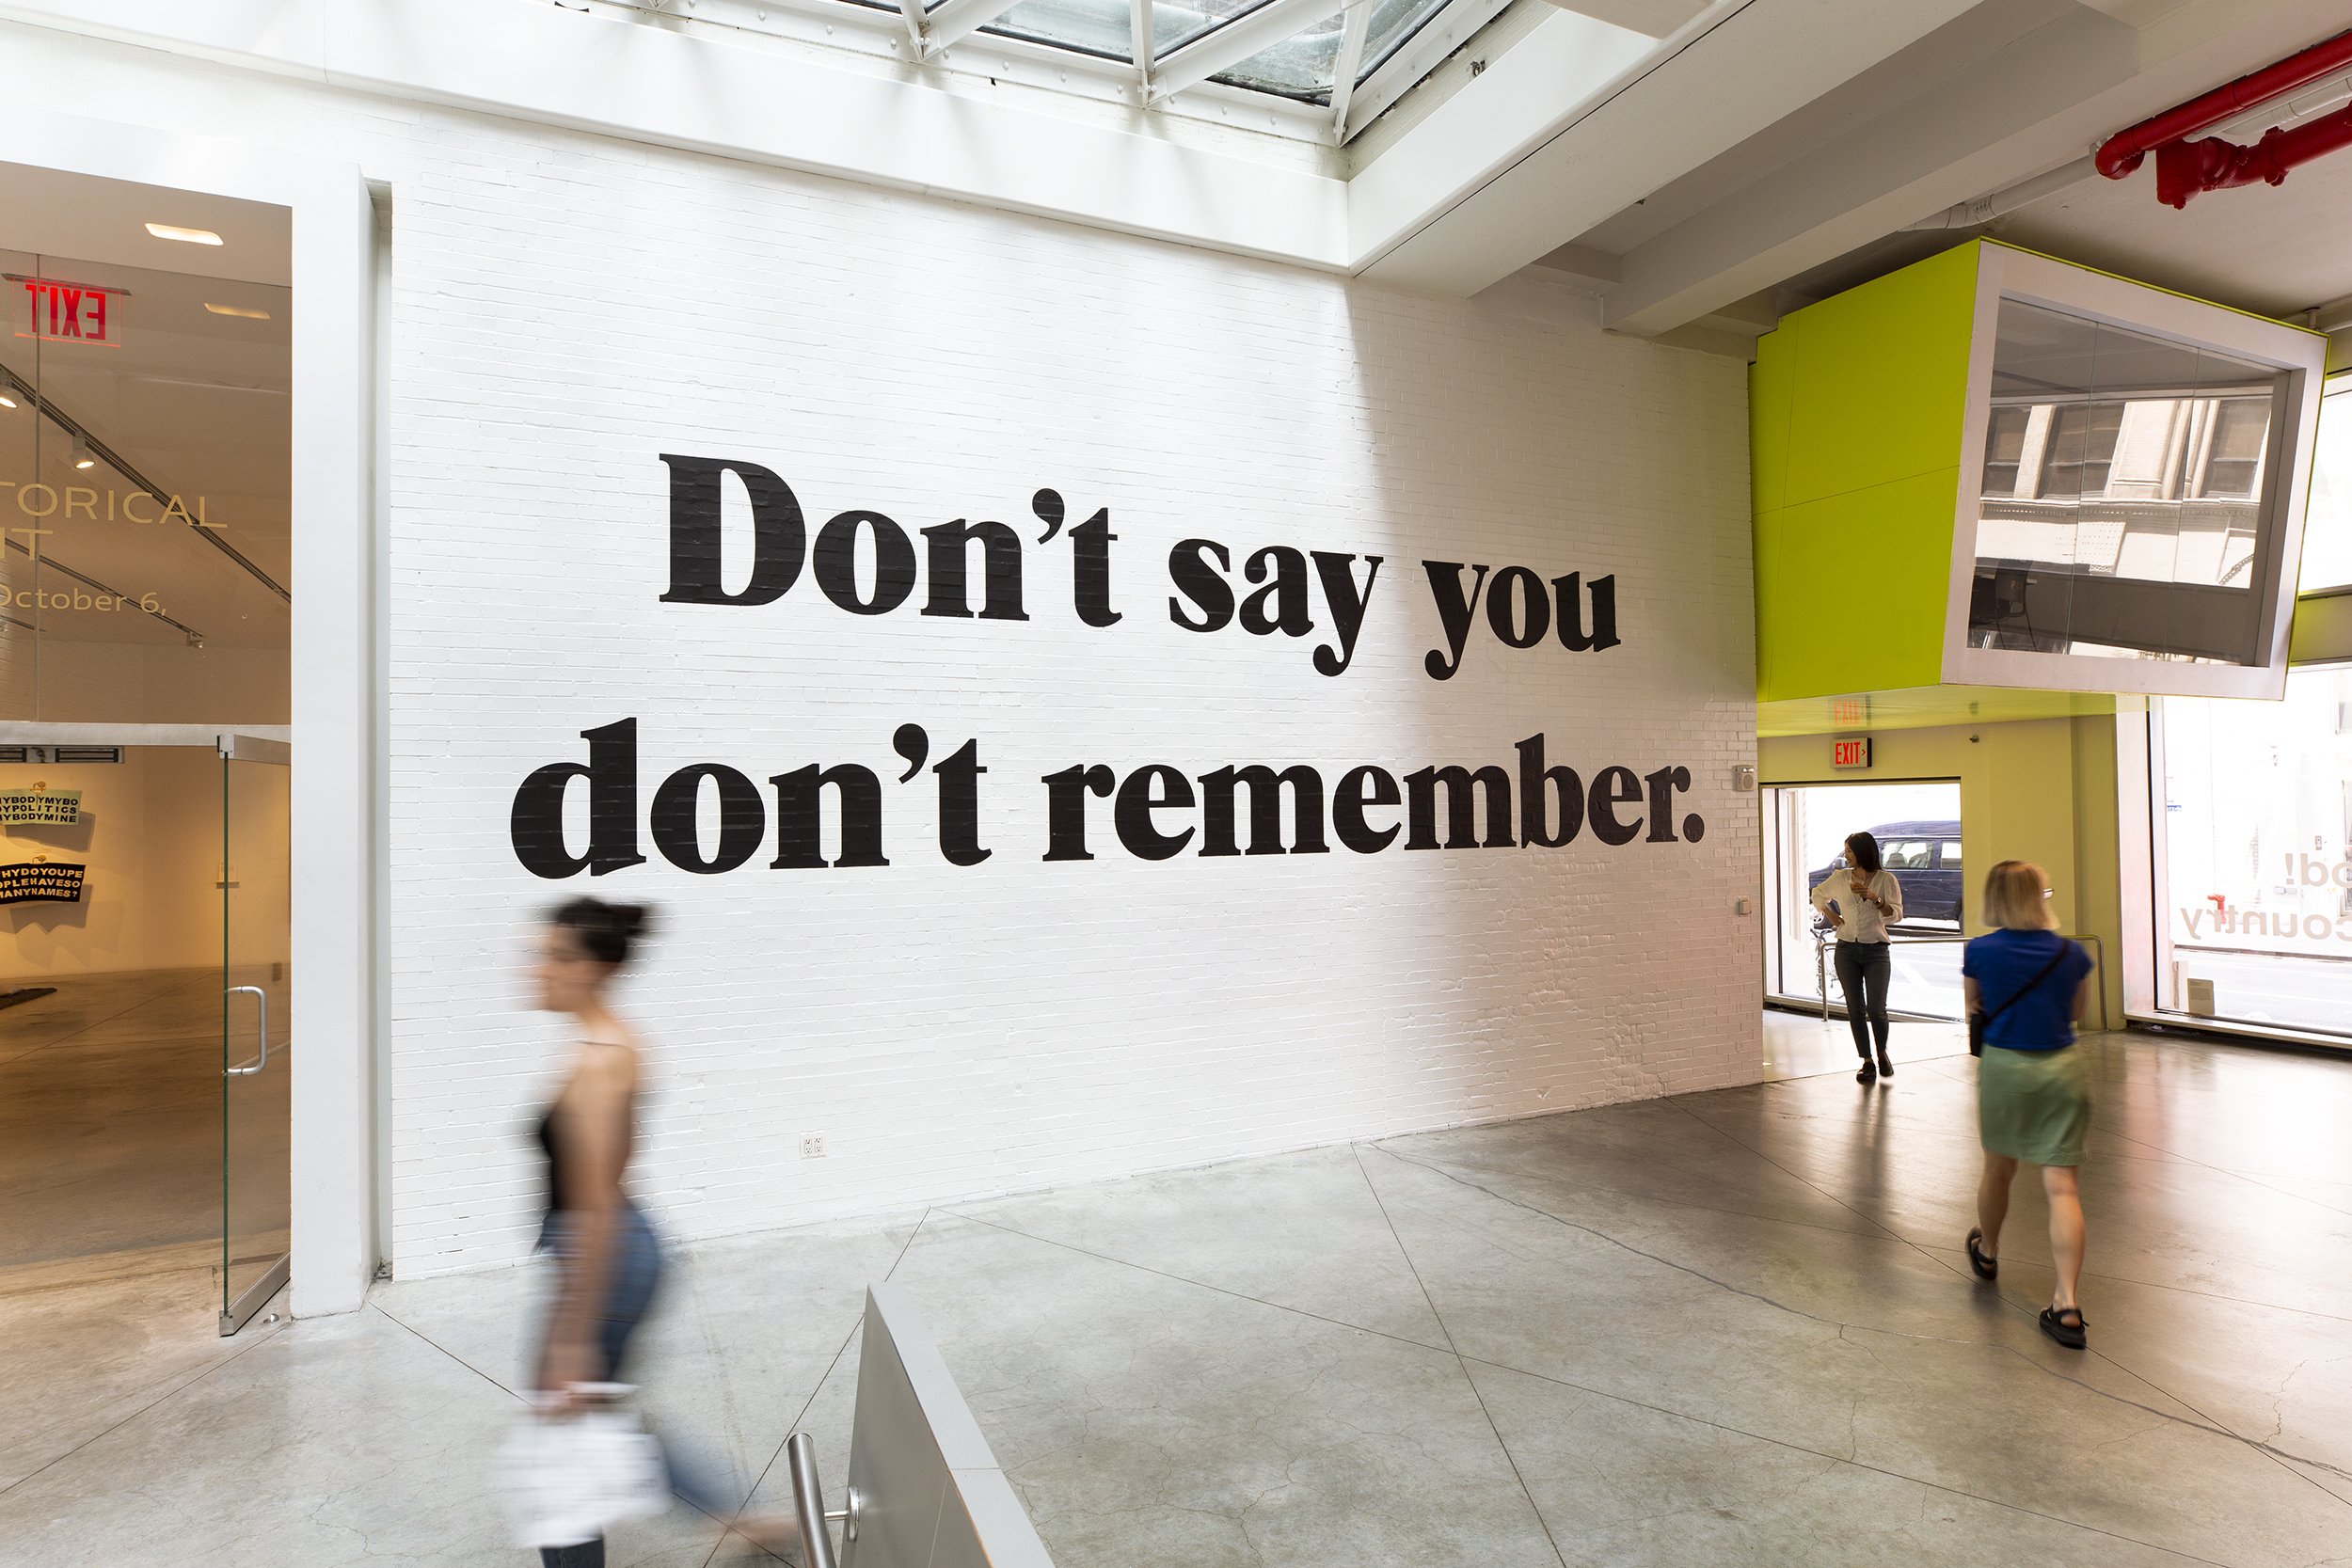   Rec-elections (Don’t say you don’t remember.),  2019 site-specific installation, vinyl text 72 x 252 inches Installation view,  The Historical Present , The New School, NY, NY 